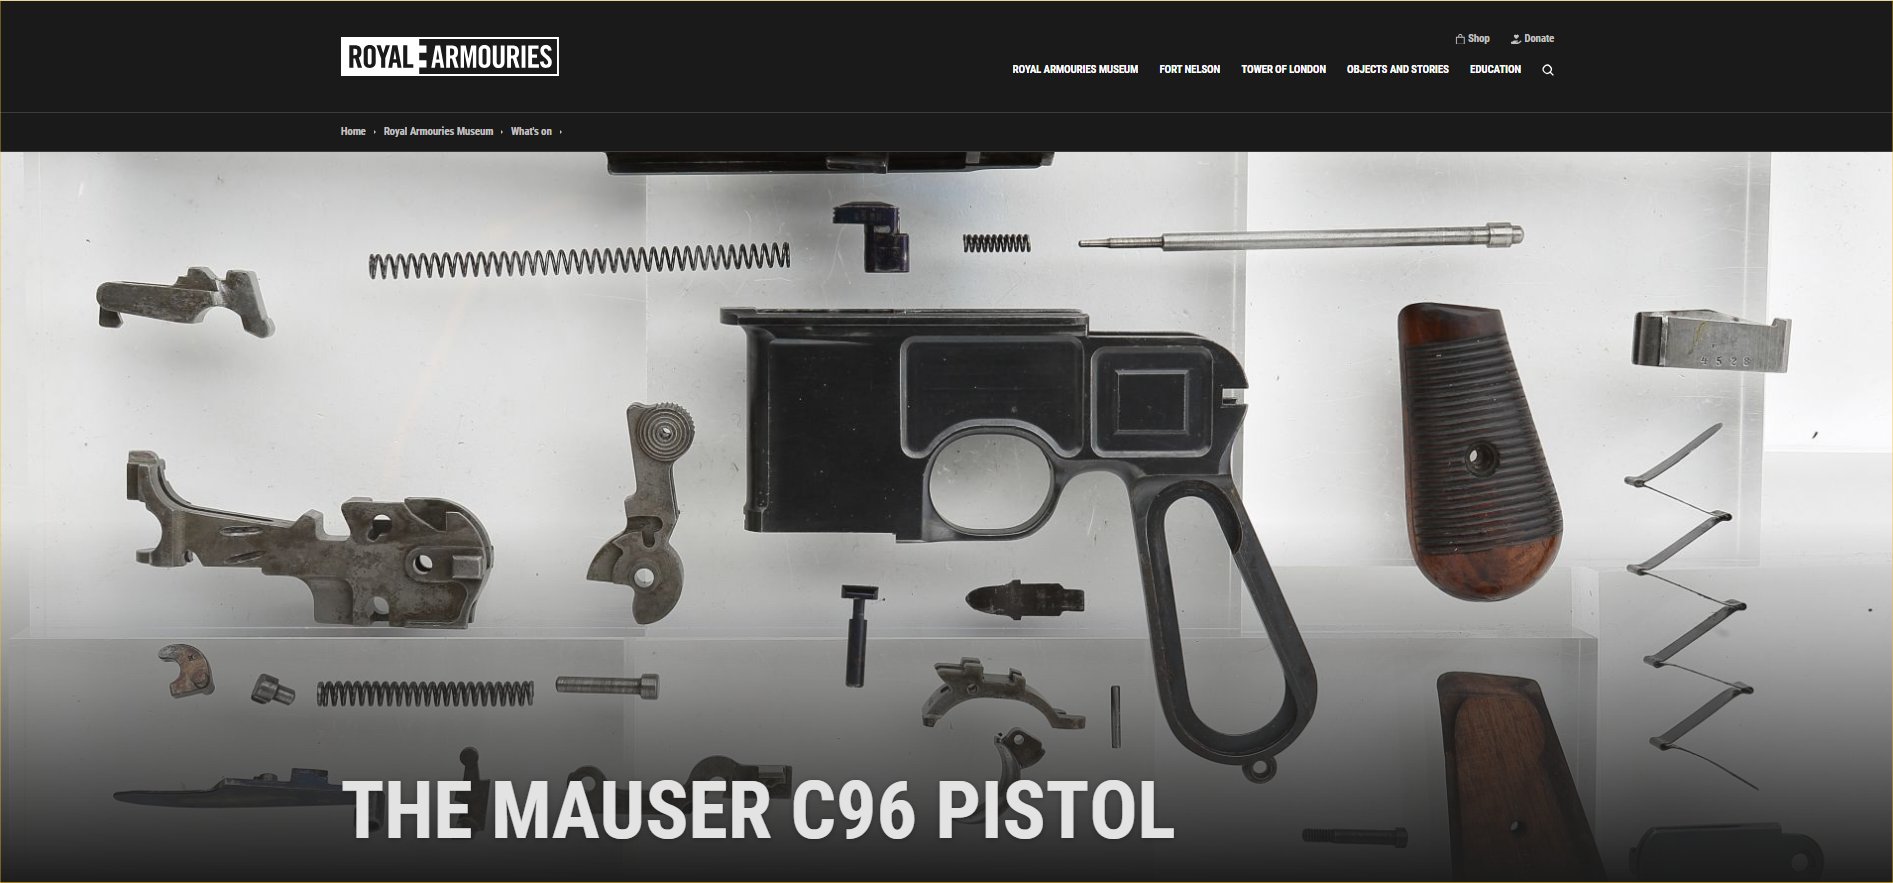 Royal Armouries Leeds - C96 Mauser Pistol Live Lecture